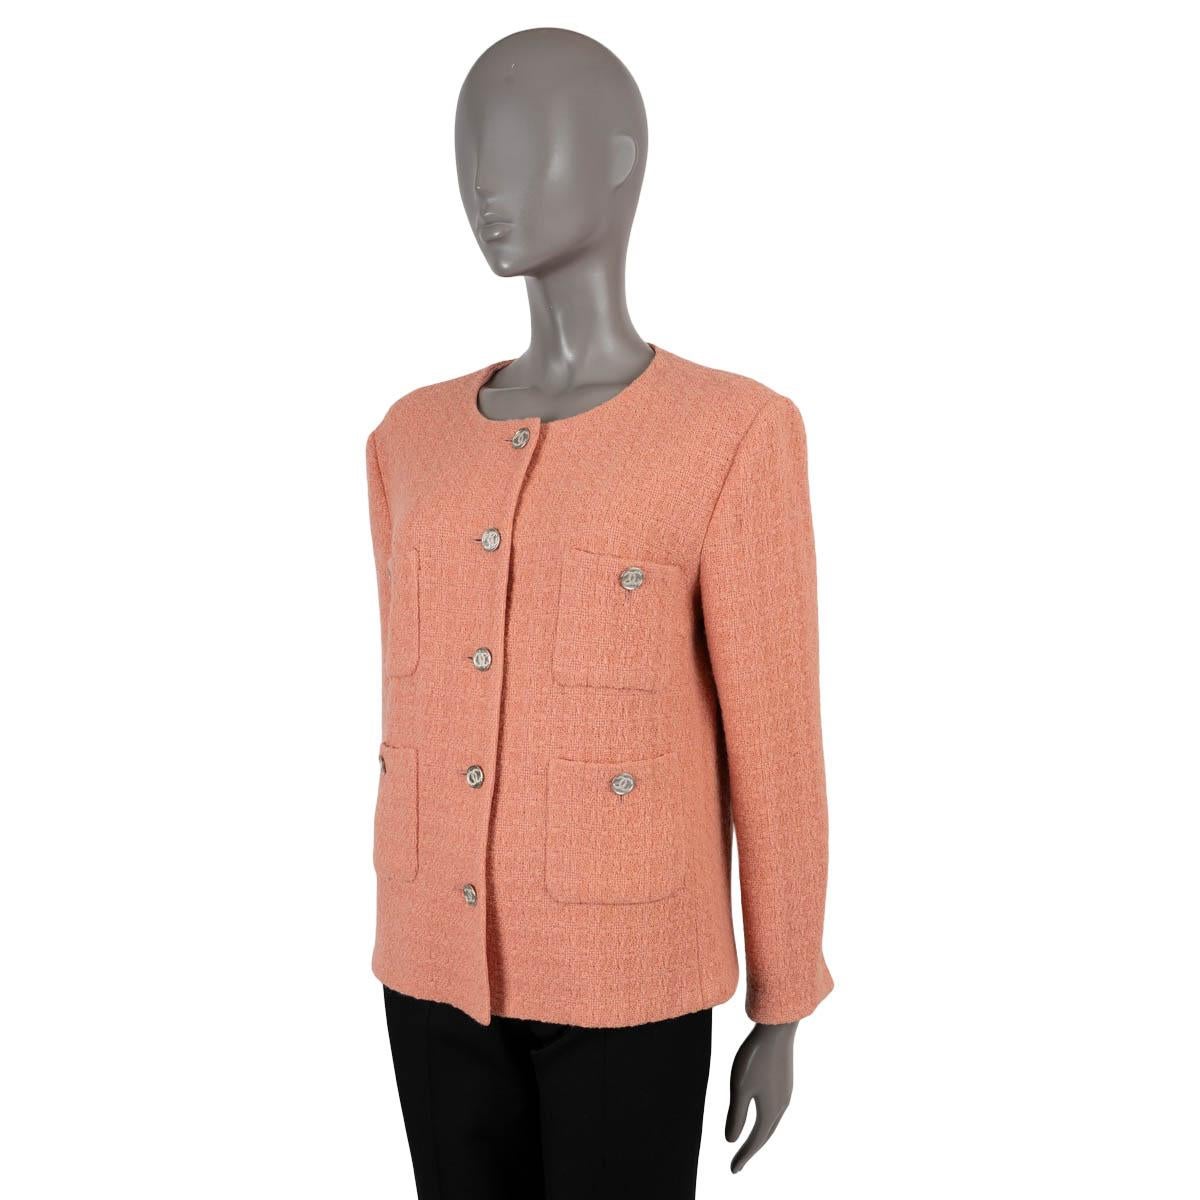 100% authentic Chanel collarless tweed jacket in pale coral pink wool (100%). Features classic four pocket design. Closes with silver-tone metal CC buttons and is lined in silk (100%). Has been worn and is in excellent condition. 

2021